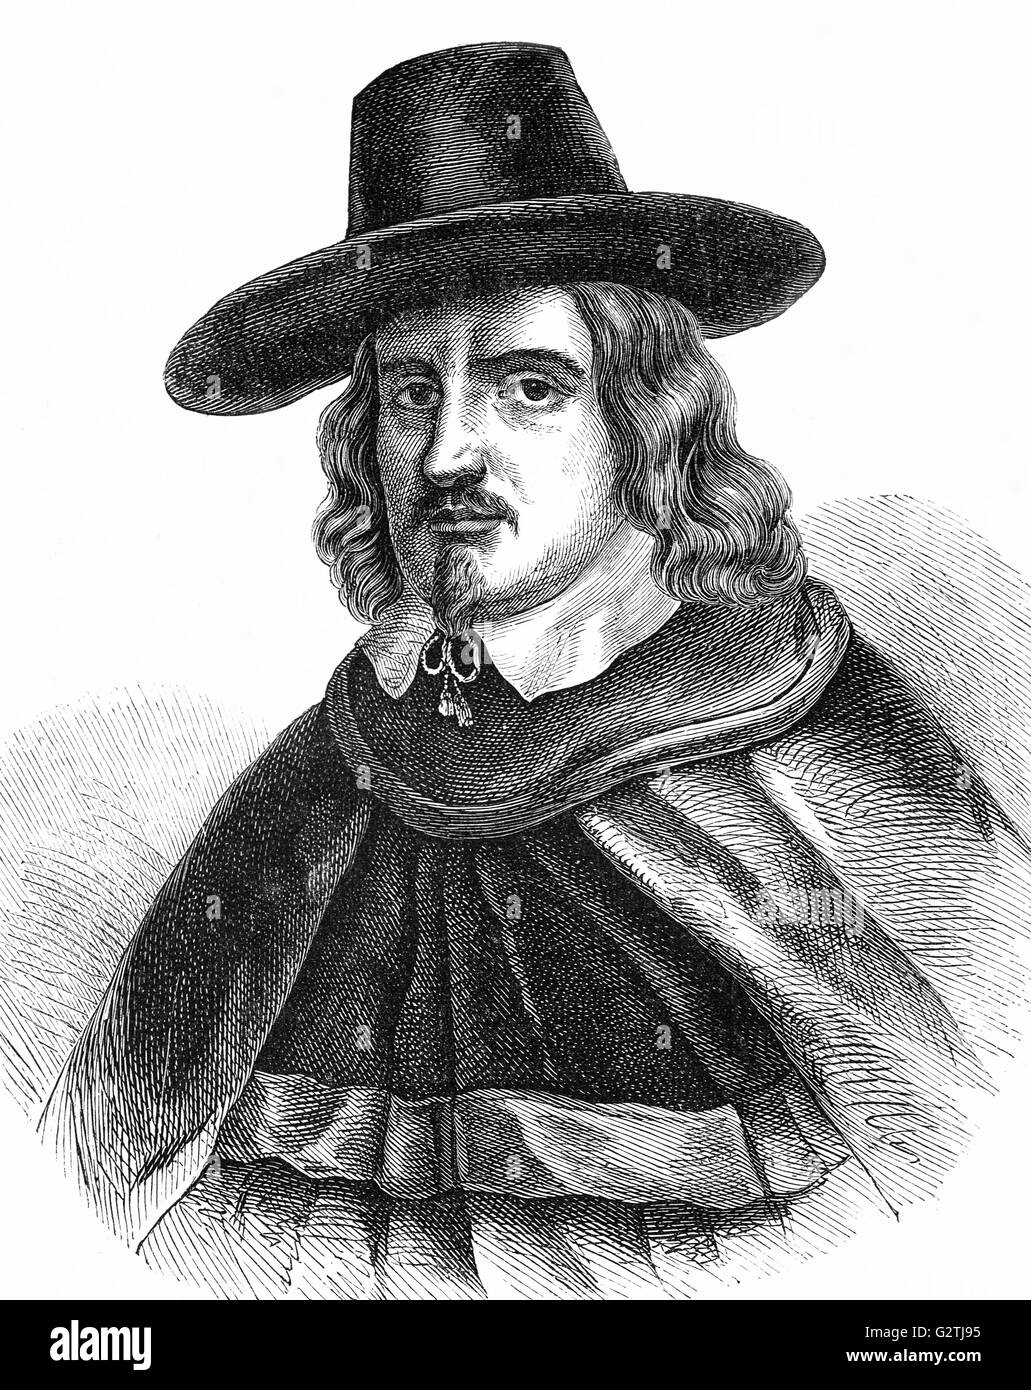 John Bradshaw (1602 – 1659) was an English judge,  notable for his role President of the High Court of Justice during the trial of King Charles I and as the first Lord President of the Council of State of the English Commonwealth. Stock Photo